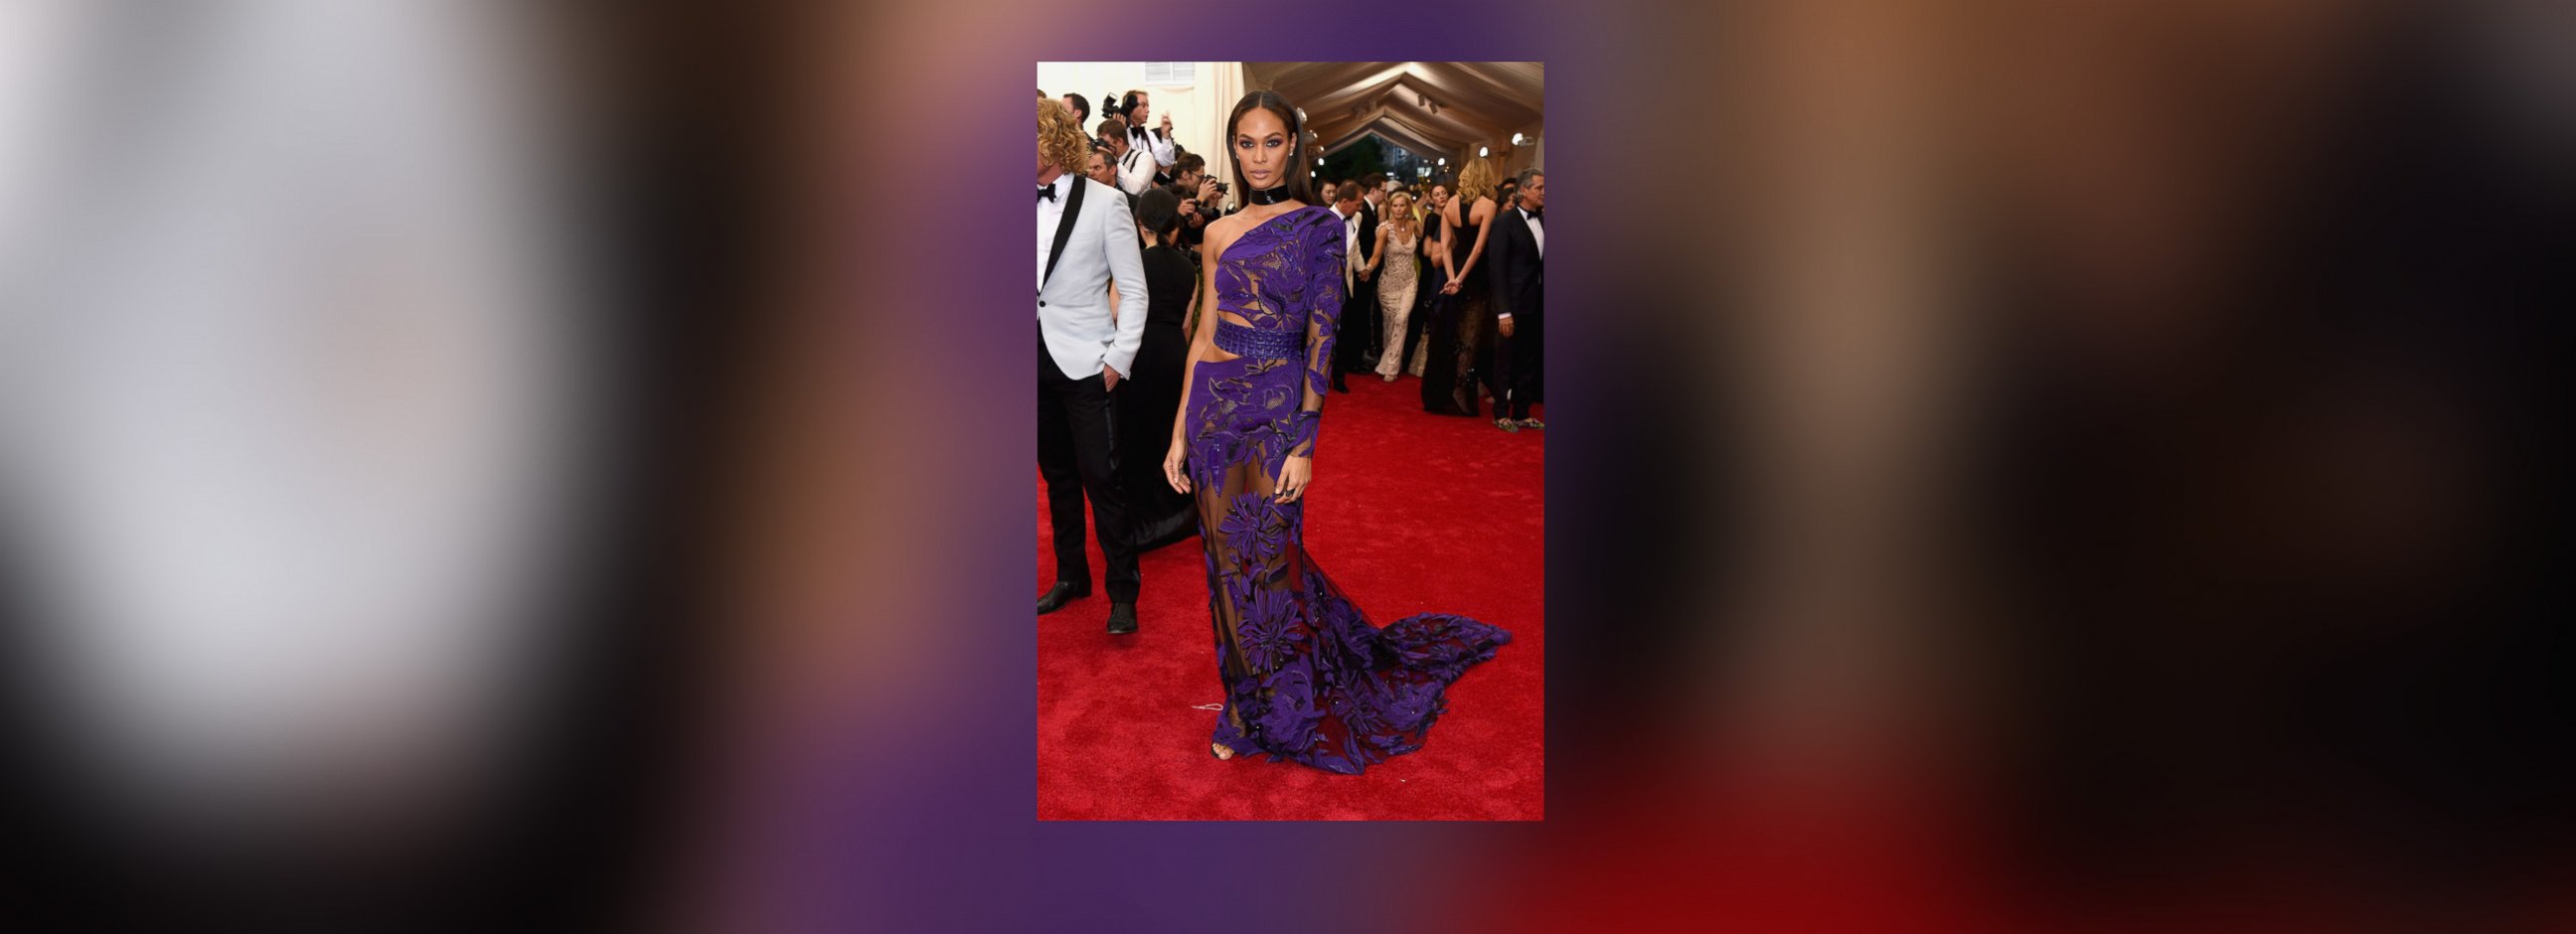 PHOTO: Joan Smalls attends the 'China: Through The Looking Glass' Costume Institute Benefit Gala 